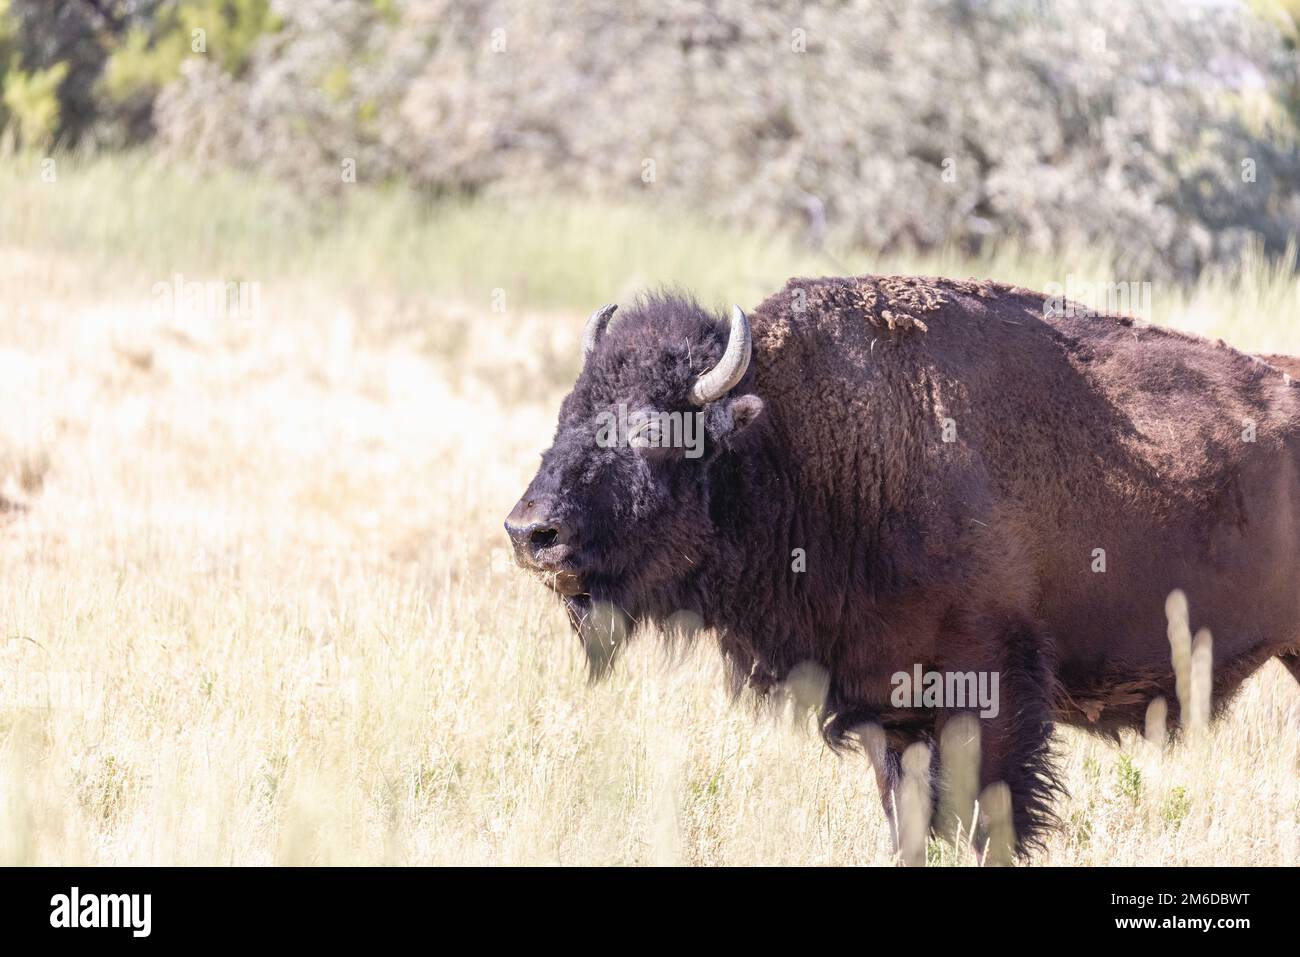 Wild American Bison, also called Buffalo, in a conservation program on Antelope Island, Utah, United States. Stock Photo